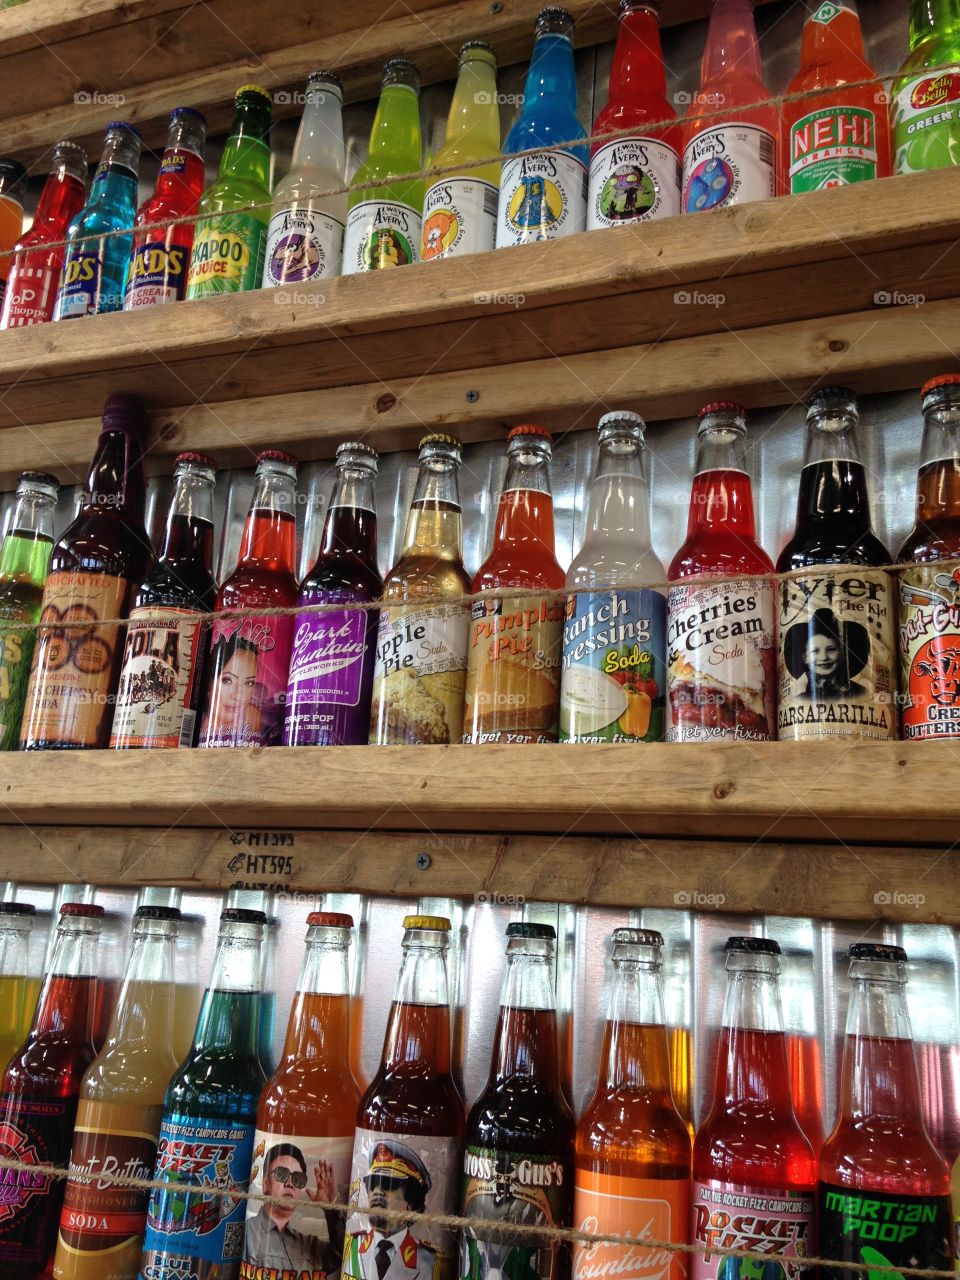 Rocket Fizz candy store in Edmond Oklahoma, display of many different types of soda bottles. 